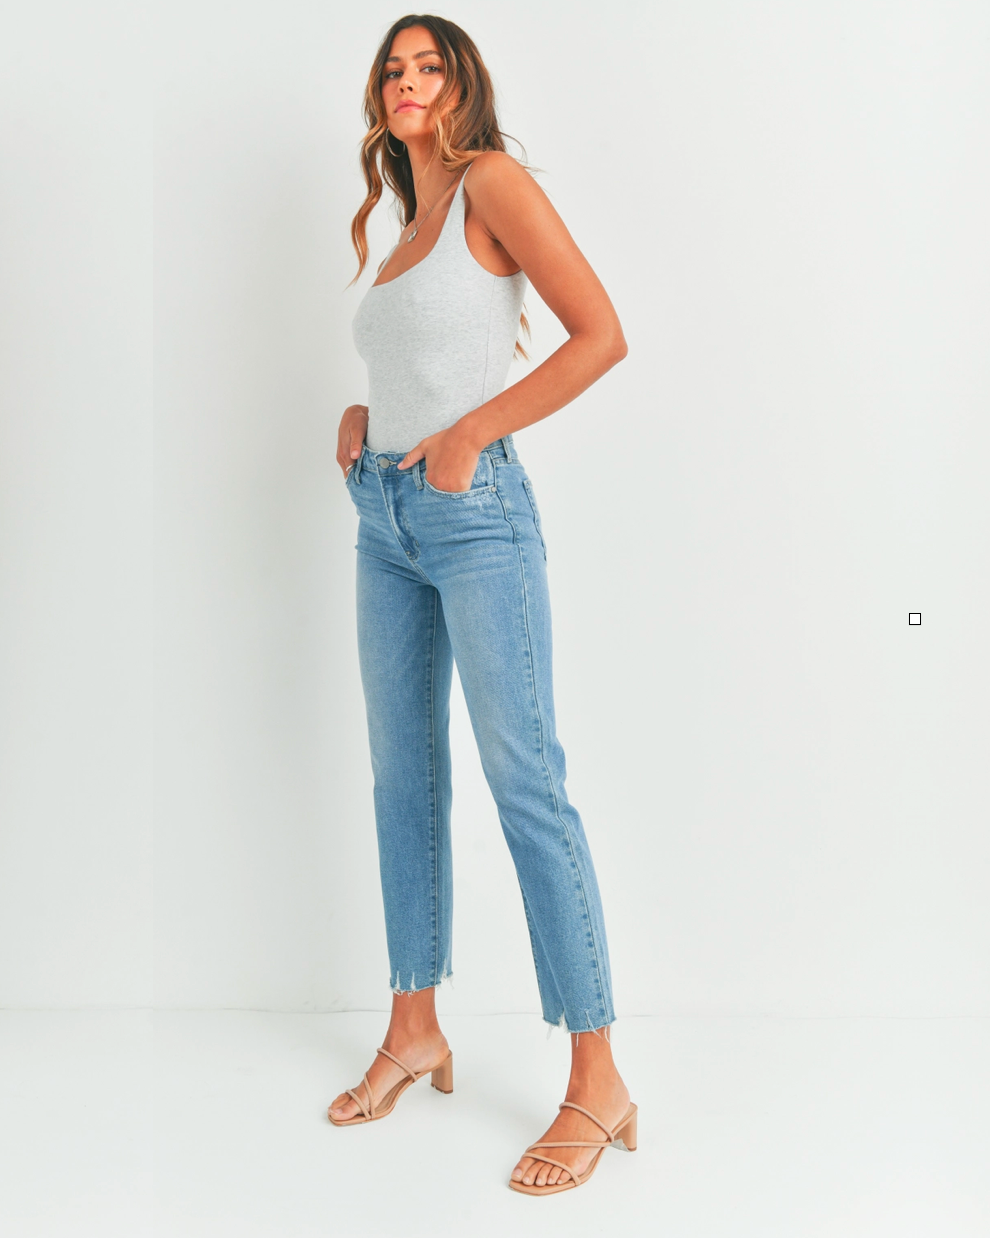 Model wearing JBD The Vintage Straight denim jeans wearing white tank tip and brown sandals on a white background